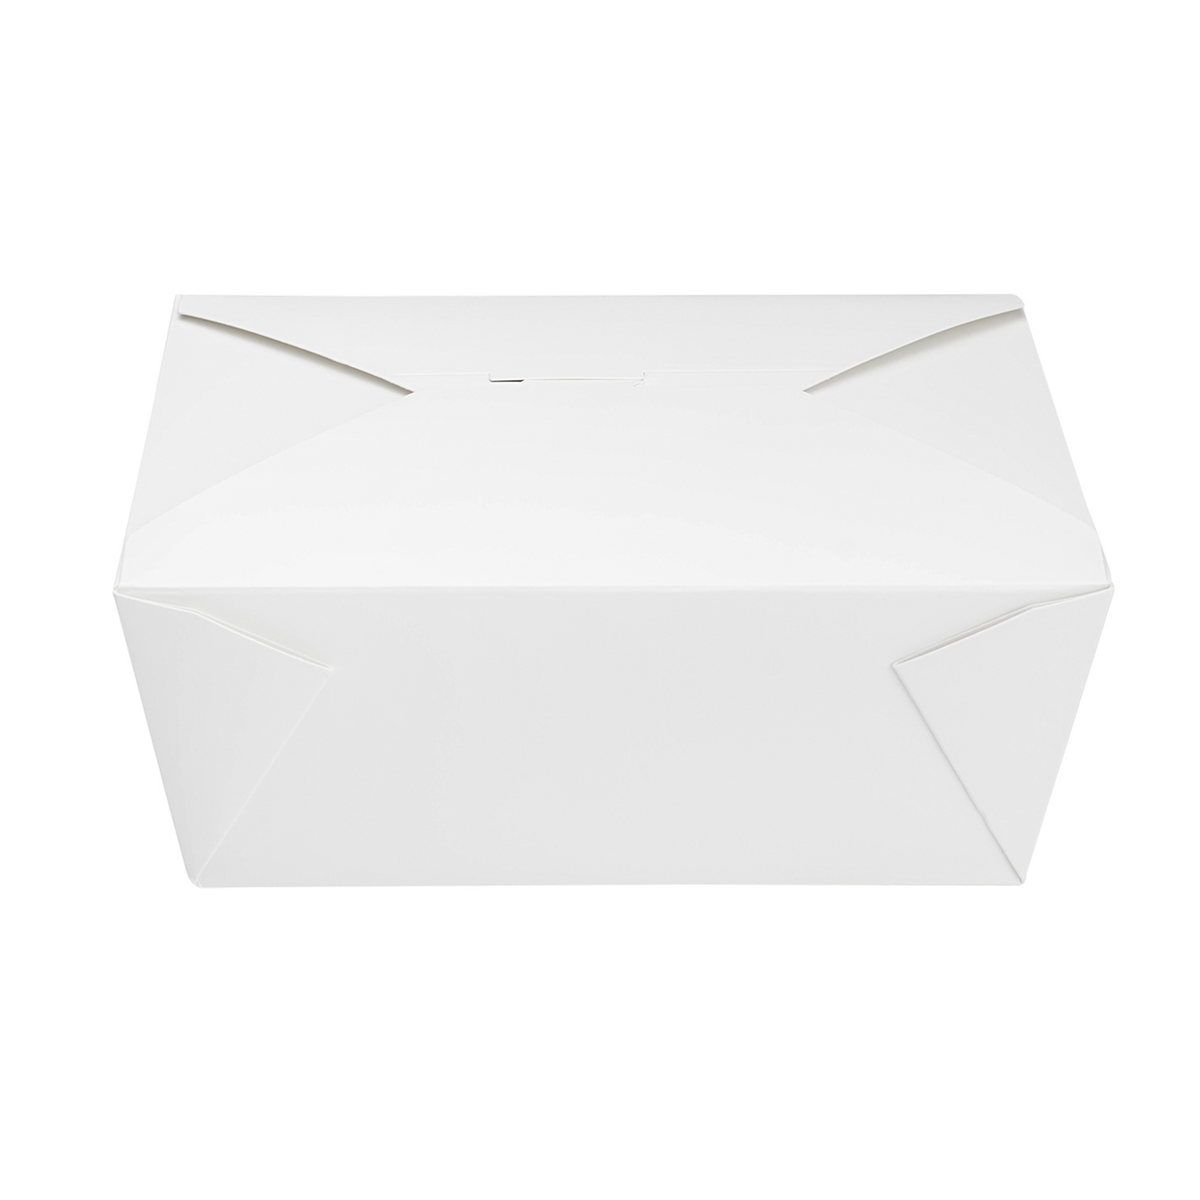 https://www.restaurantsupplydrops.shop/wp-content/uploads/1689/34/white-microwavable-folded-paper-4-take-out-container-karat-extra-large-fold-to-go-box-110oz-7-8-x-5-5-x-3-5-160-count-karat-shop-smarter-live-better-get-the-best-deals-and-discounts_5.png